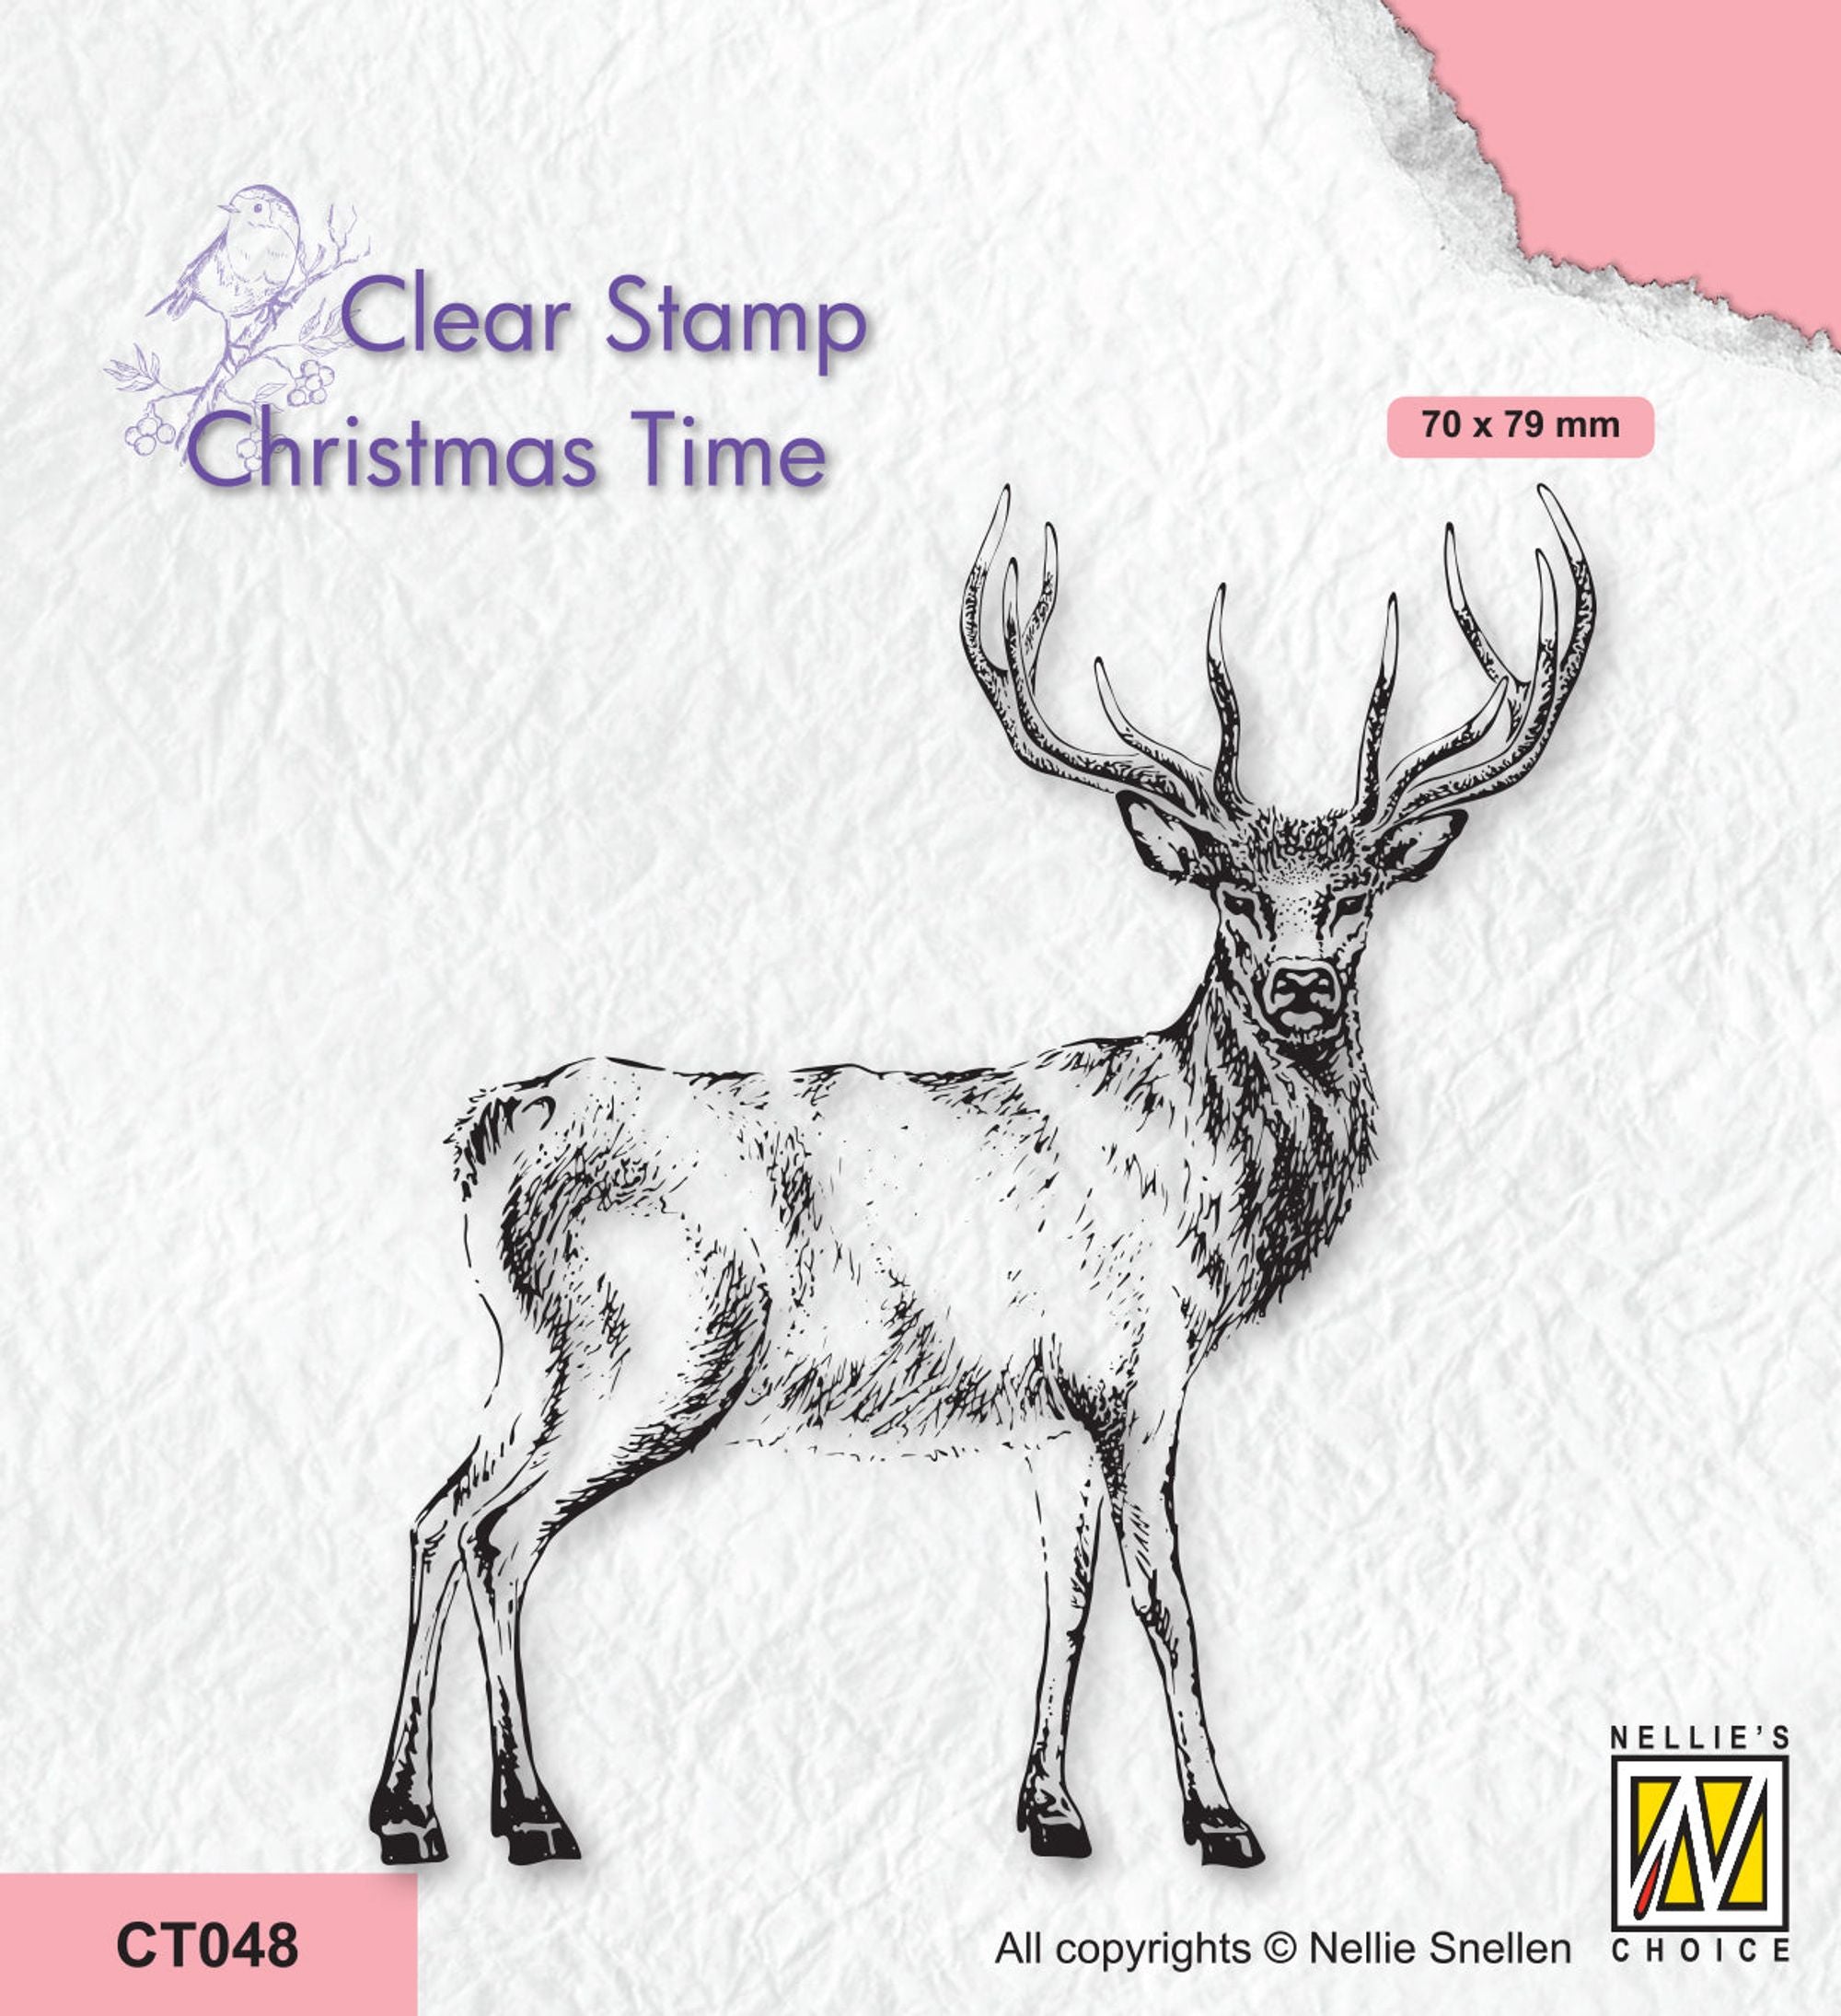 Nellie's Choice Clear Stamp - Christmas Time - Deer